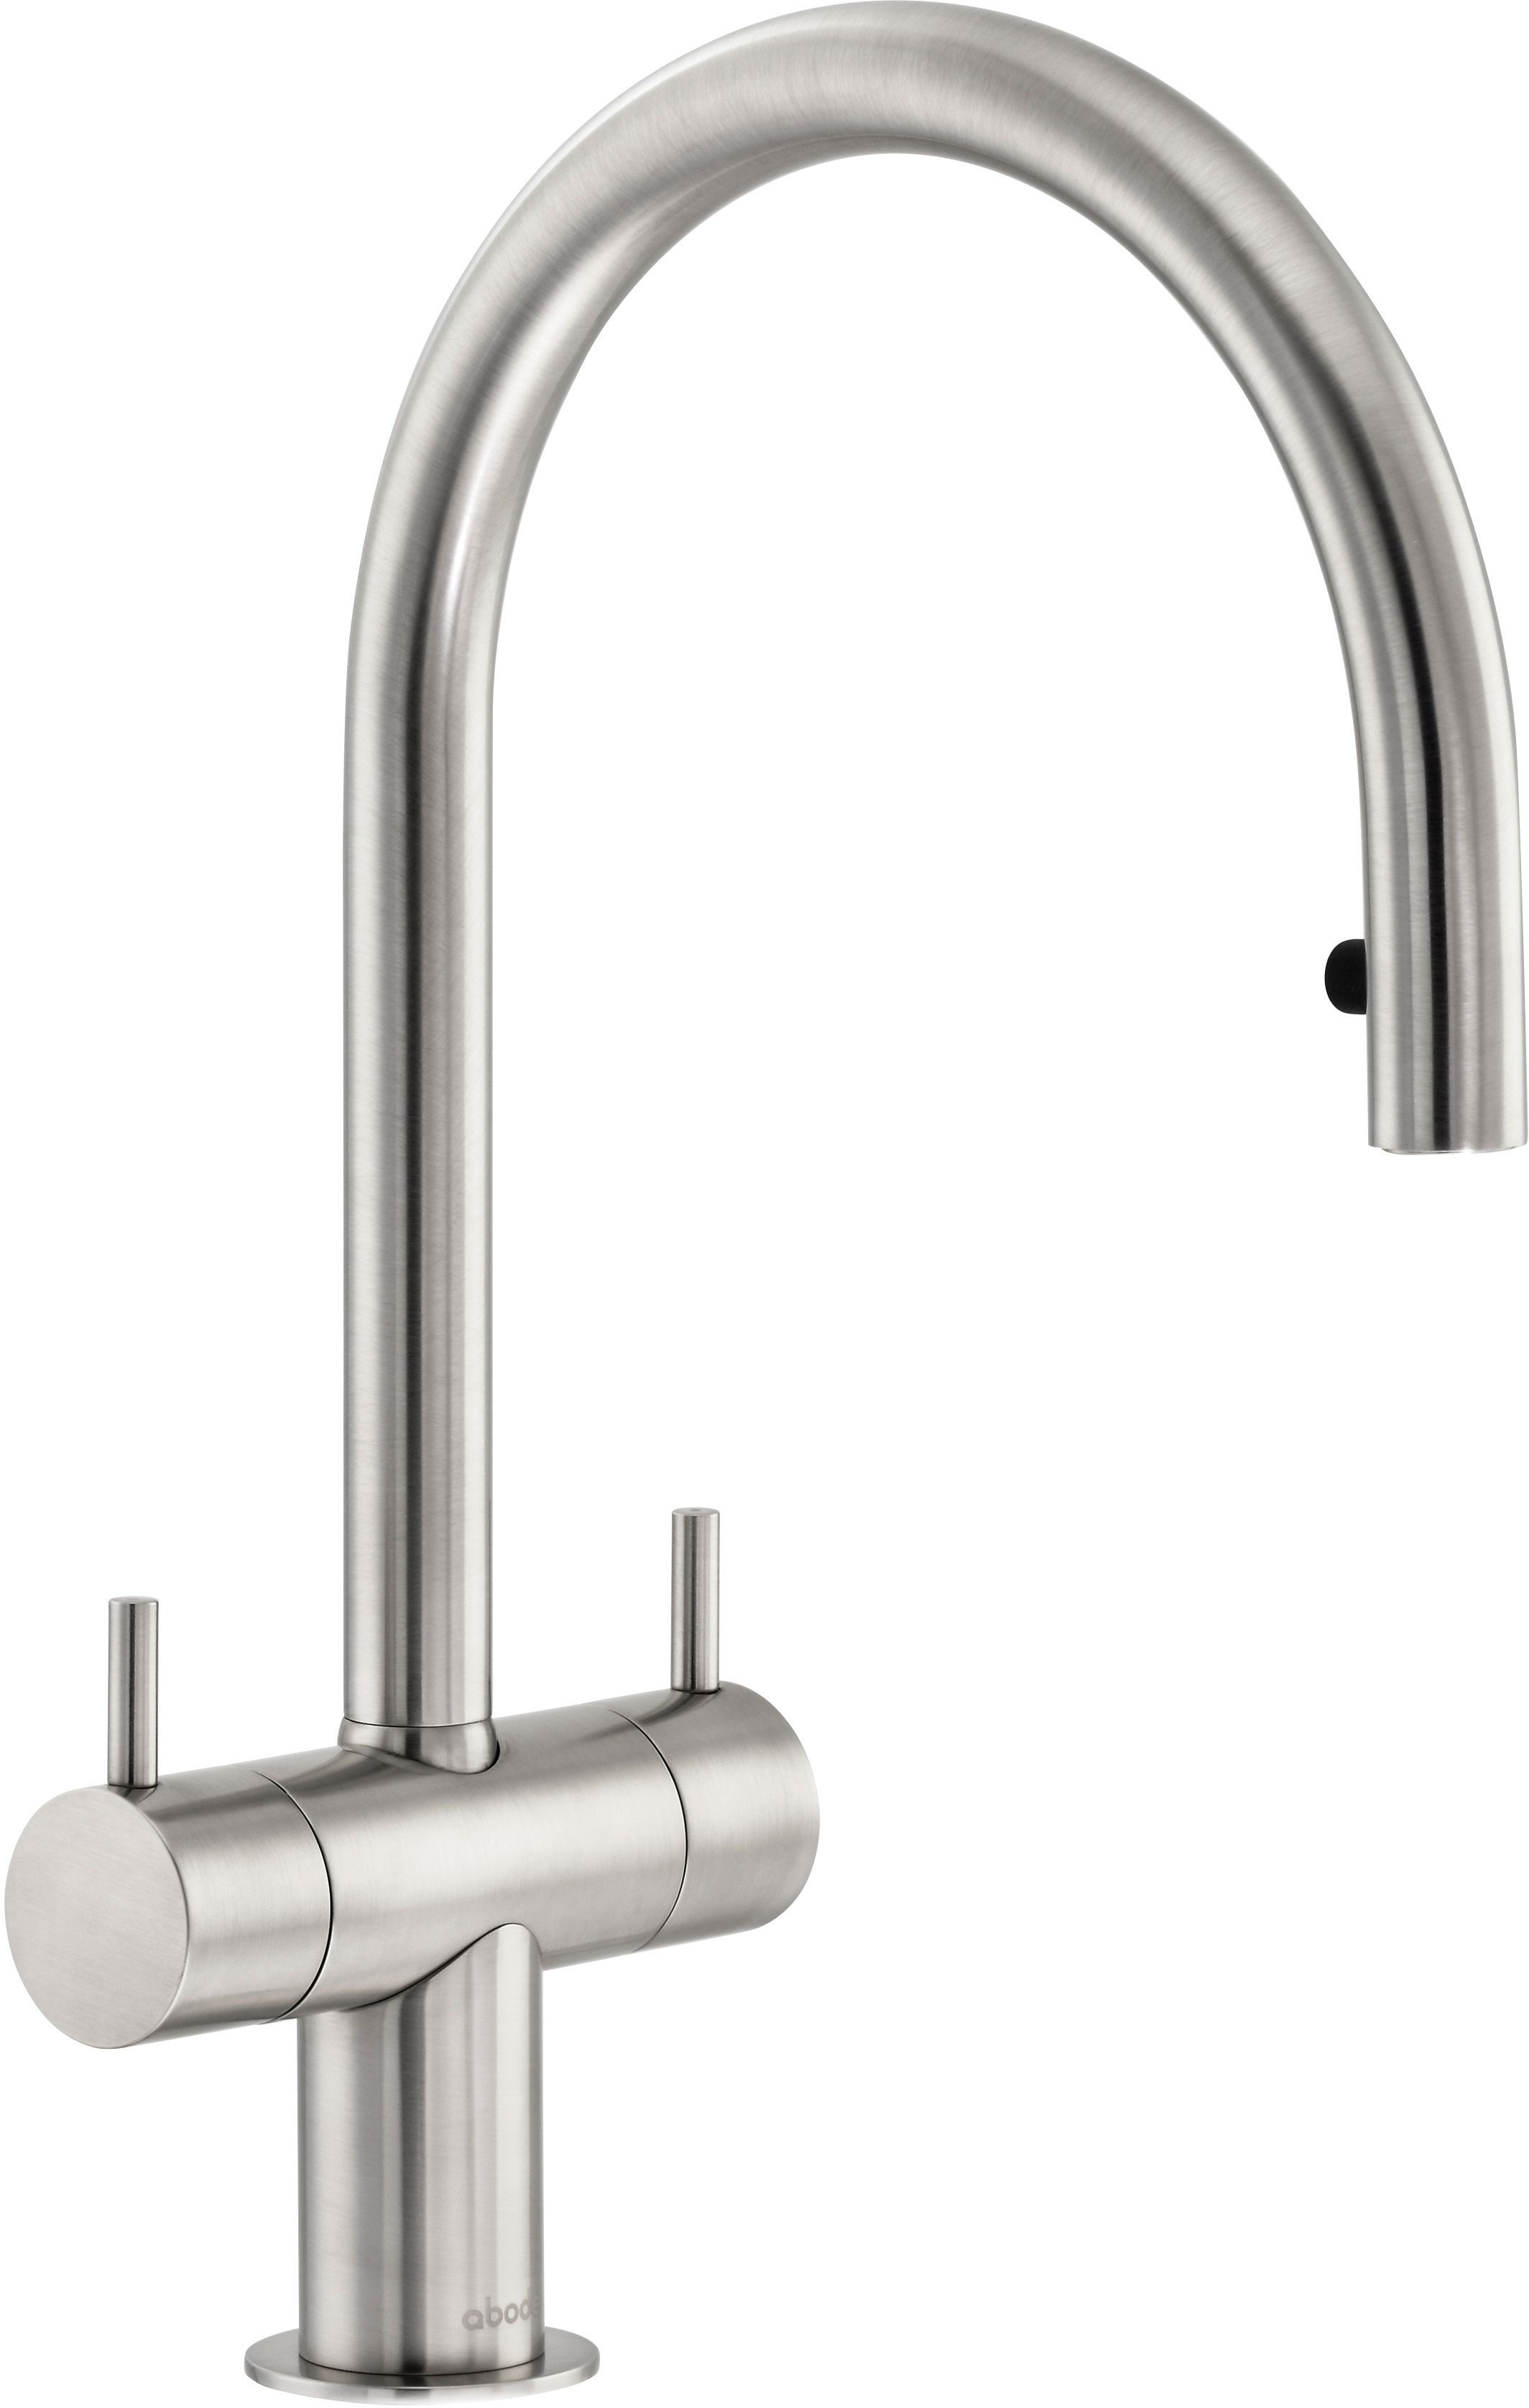 Image of Abode Hesta Dual Lever Pull Out Sink Tap - Brushed Nickel